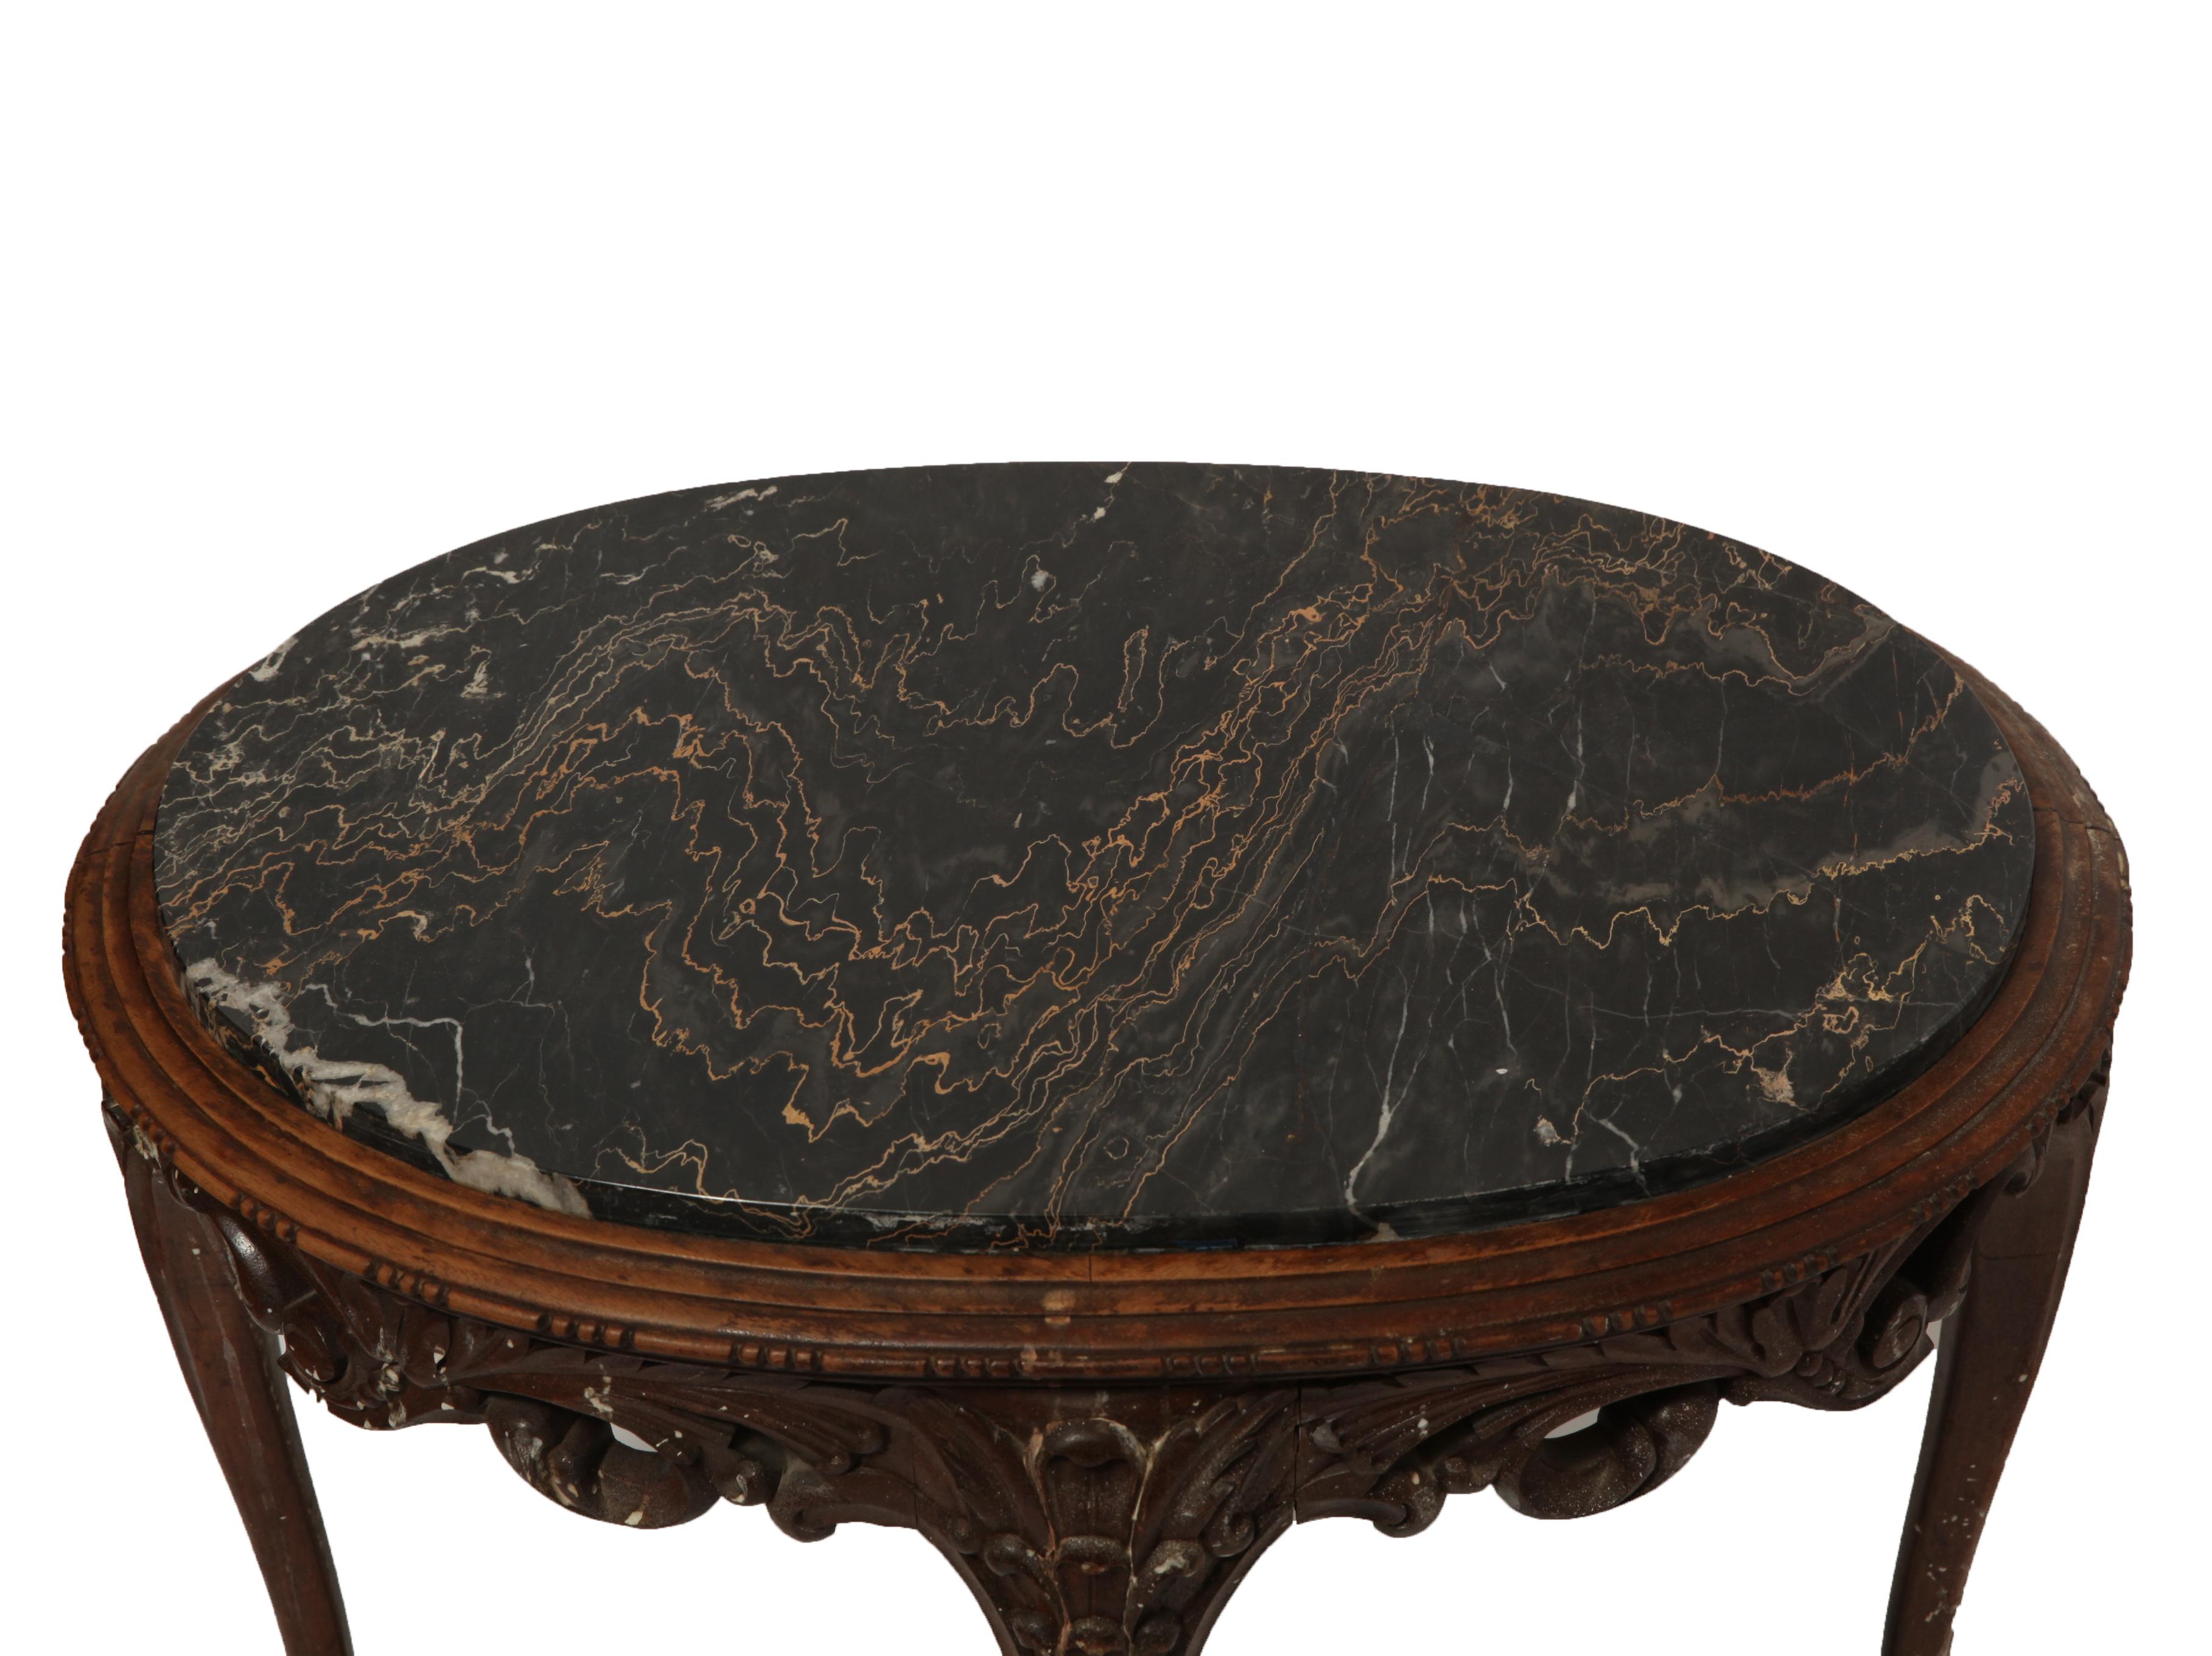 Belgian Art Nouveau oval side table in carved wood. The piece has an oval veined marble top and a 'Made in Belgium' label on the bottom. I great antique condition with age-appropriate wear and use.